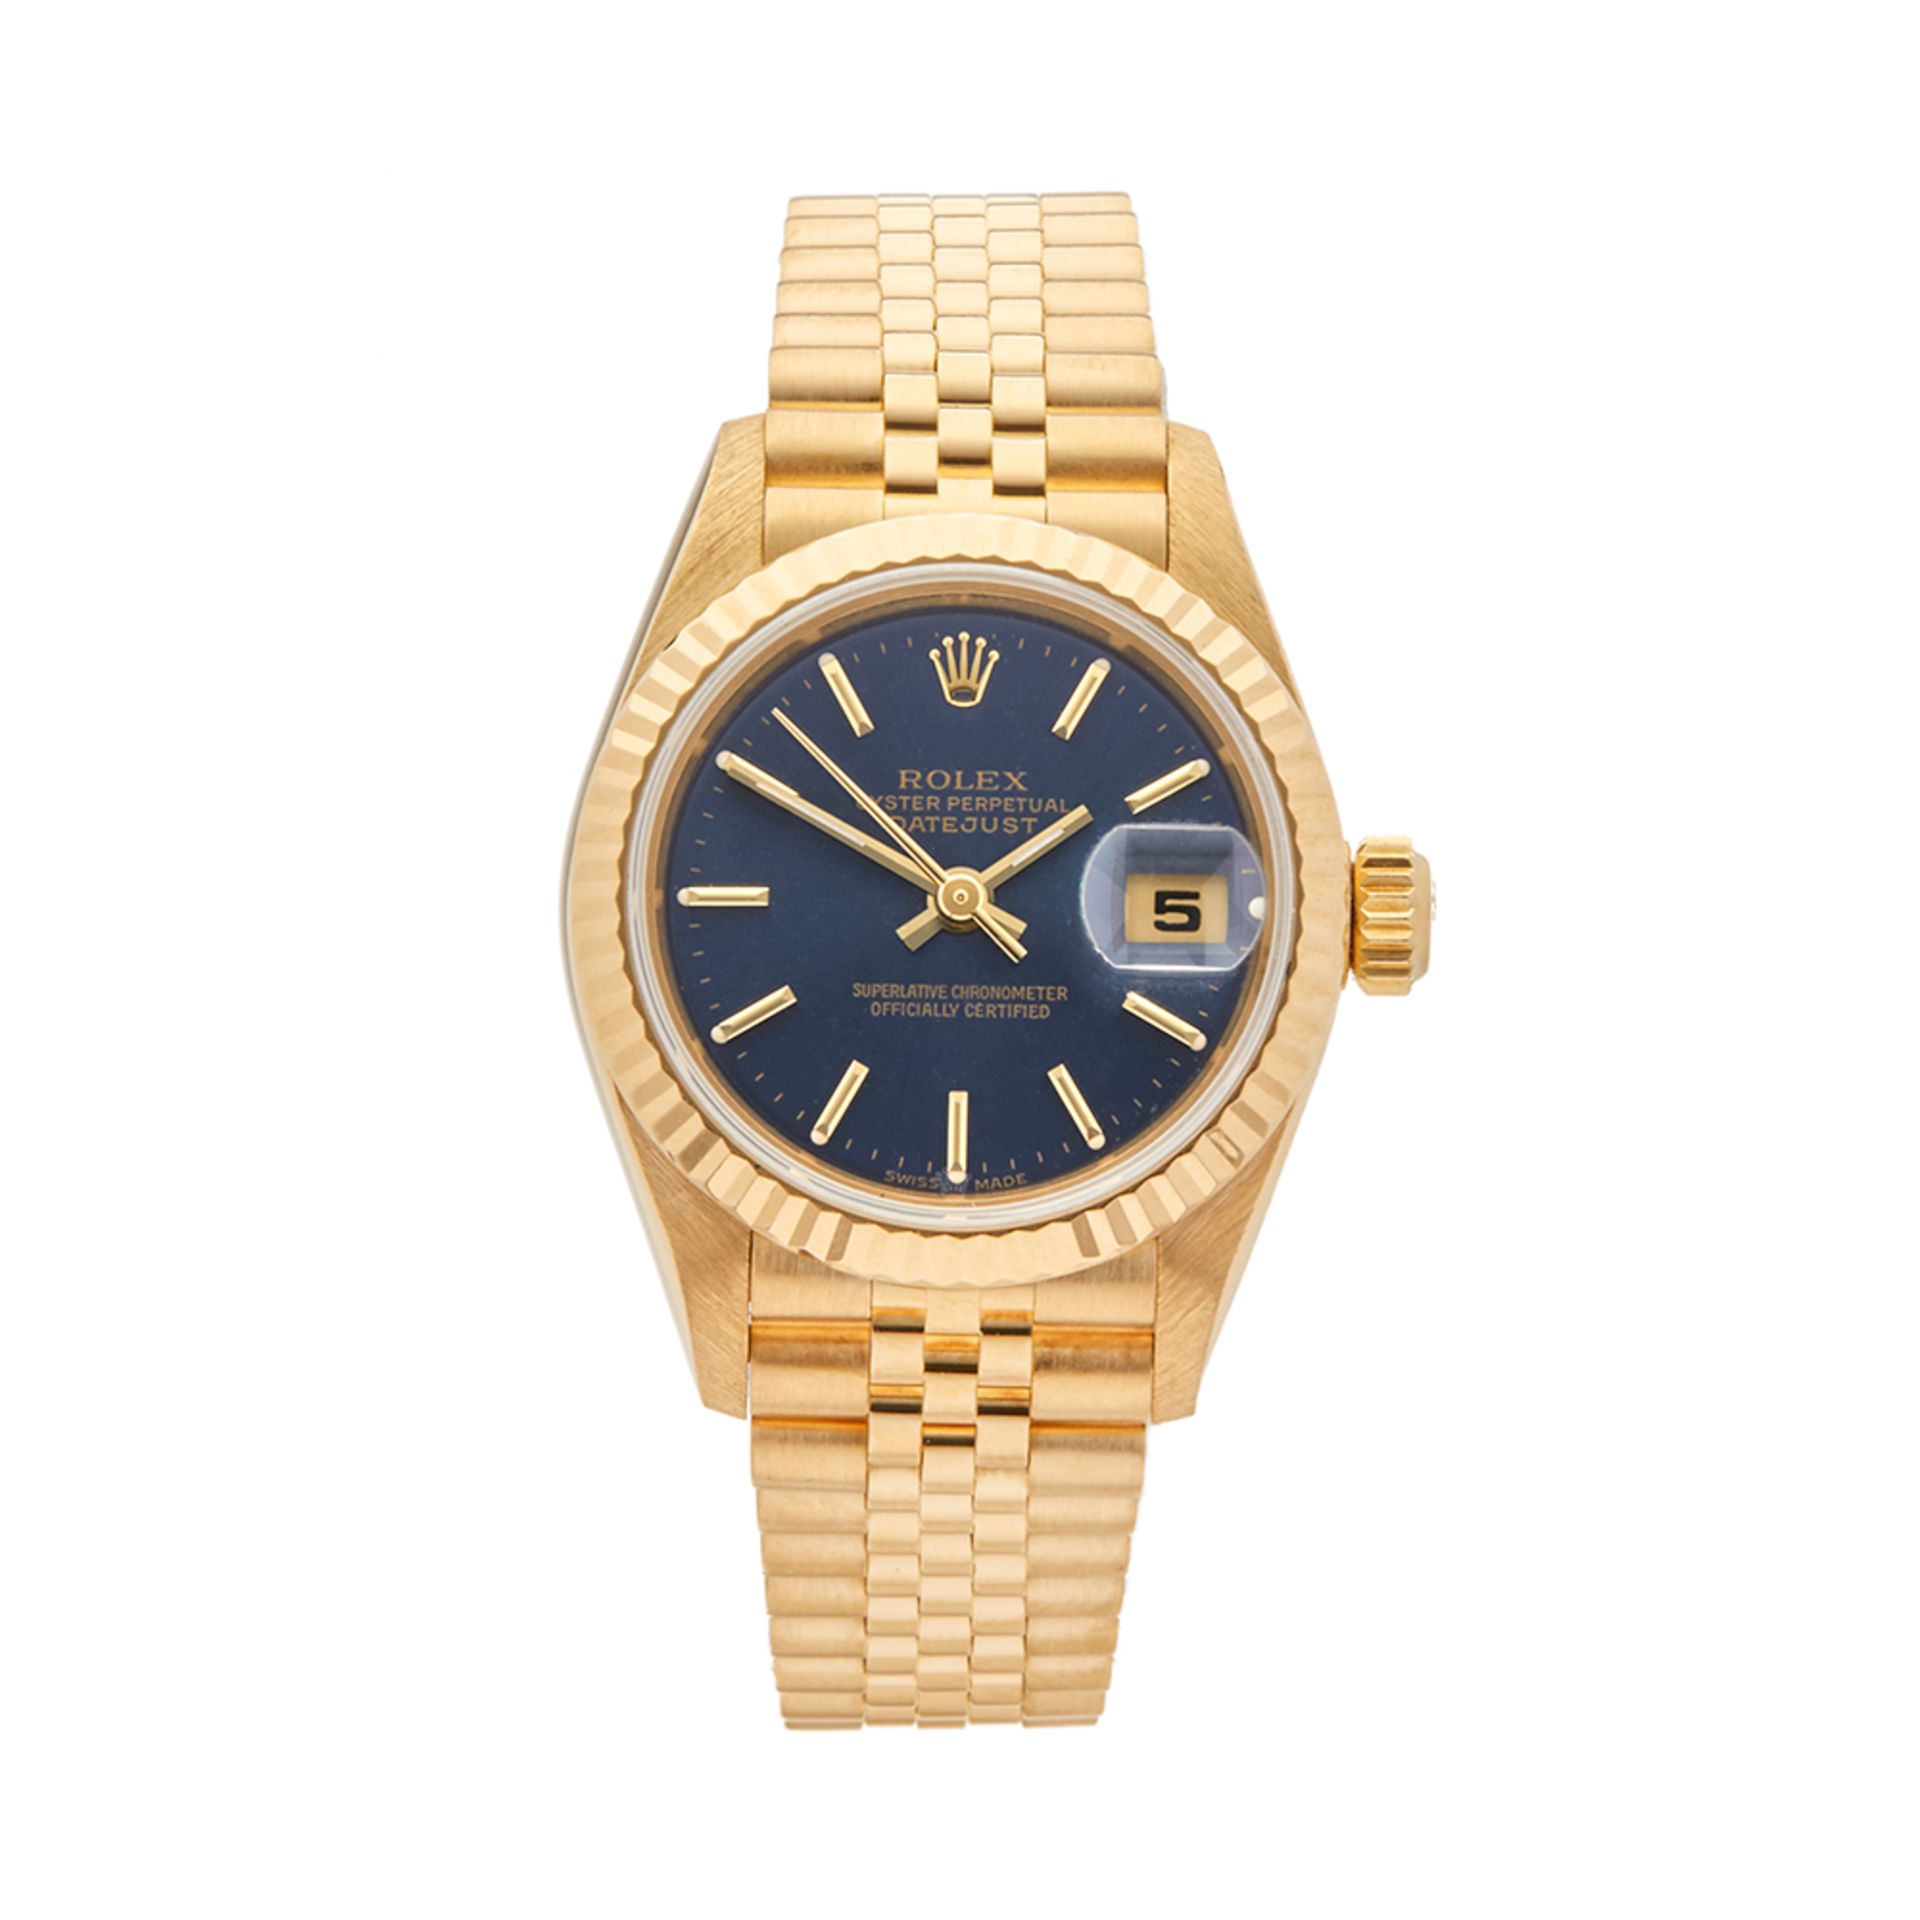 1999 Rolex DateJust 26 18k Yellow Gold - 79178 - Image 7 of 7